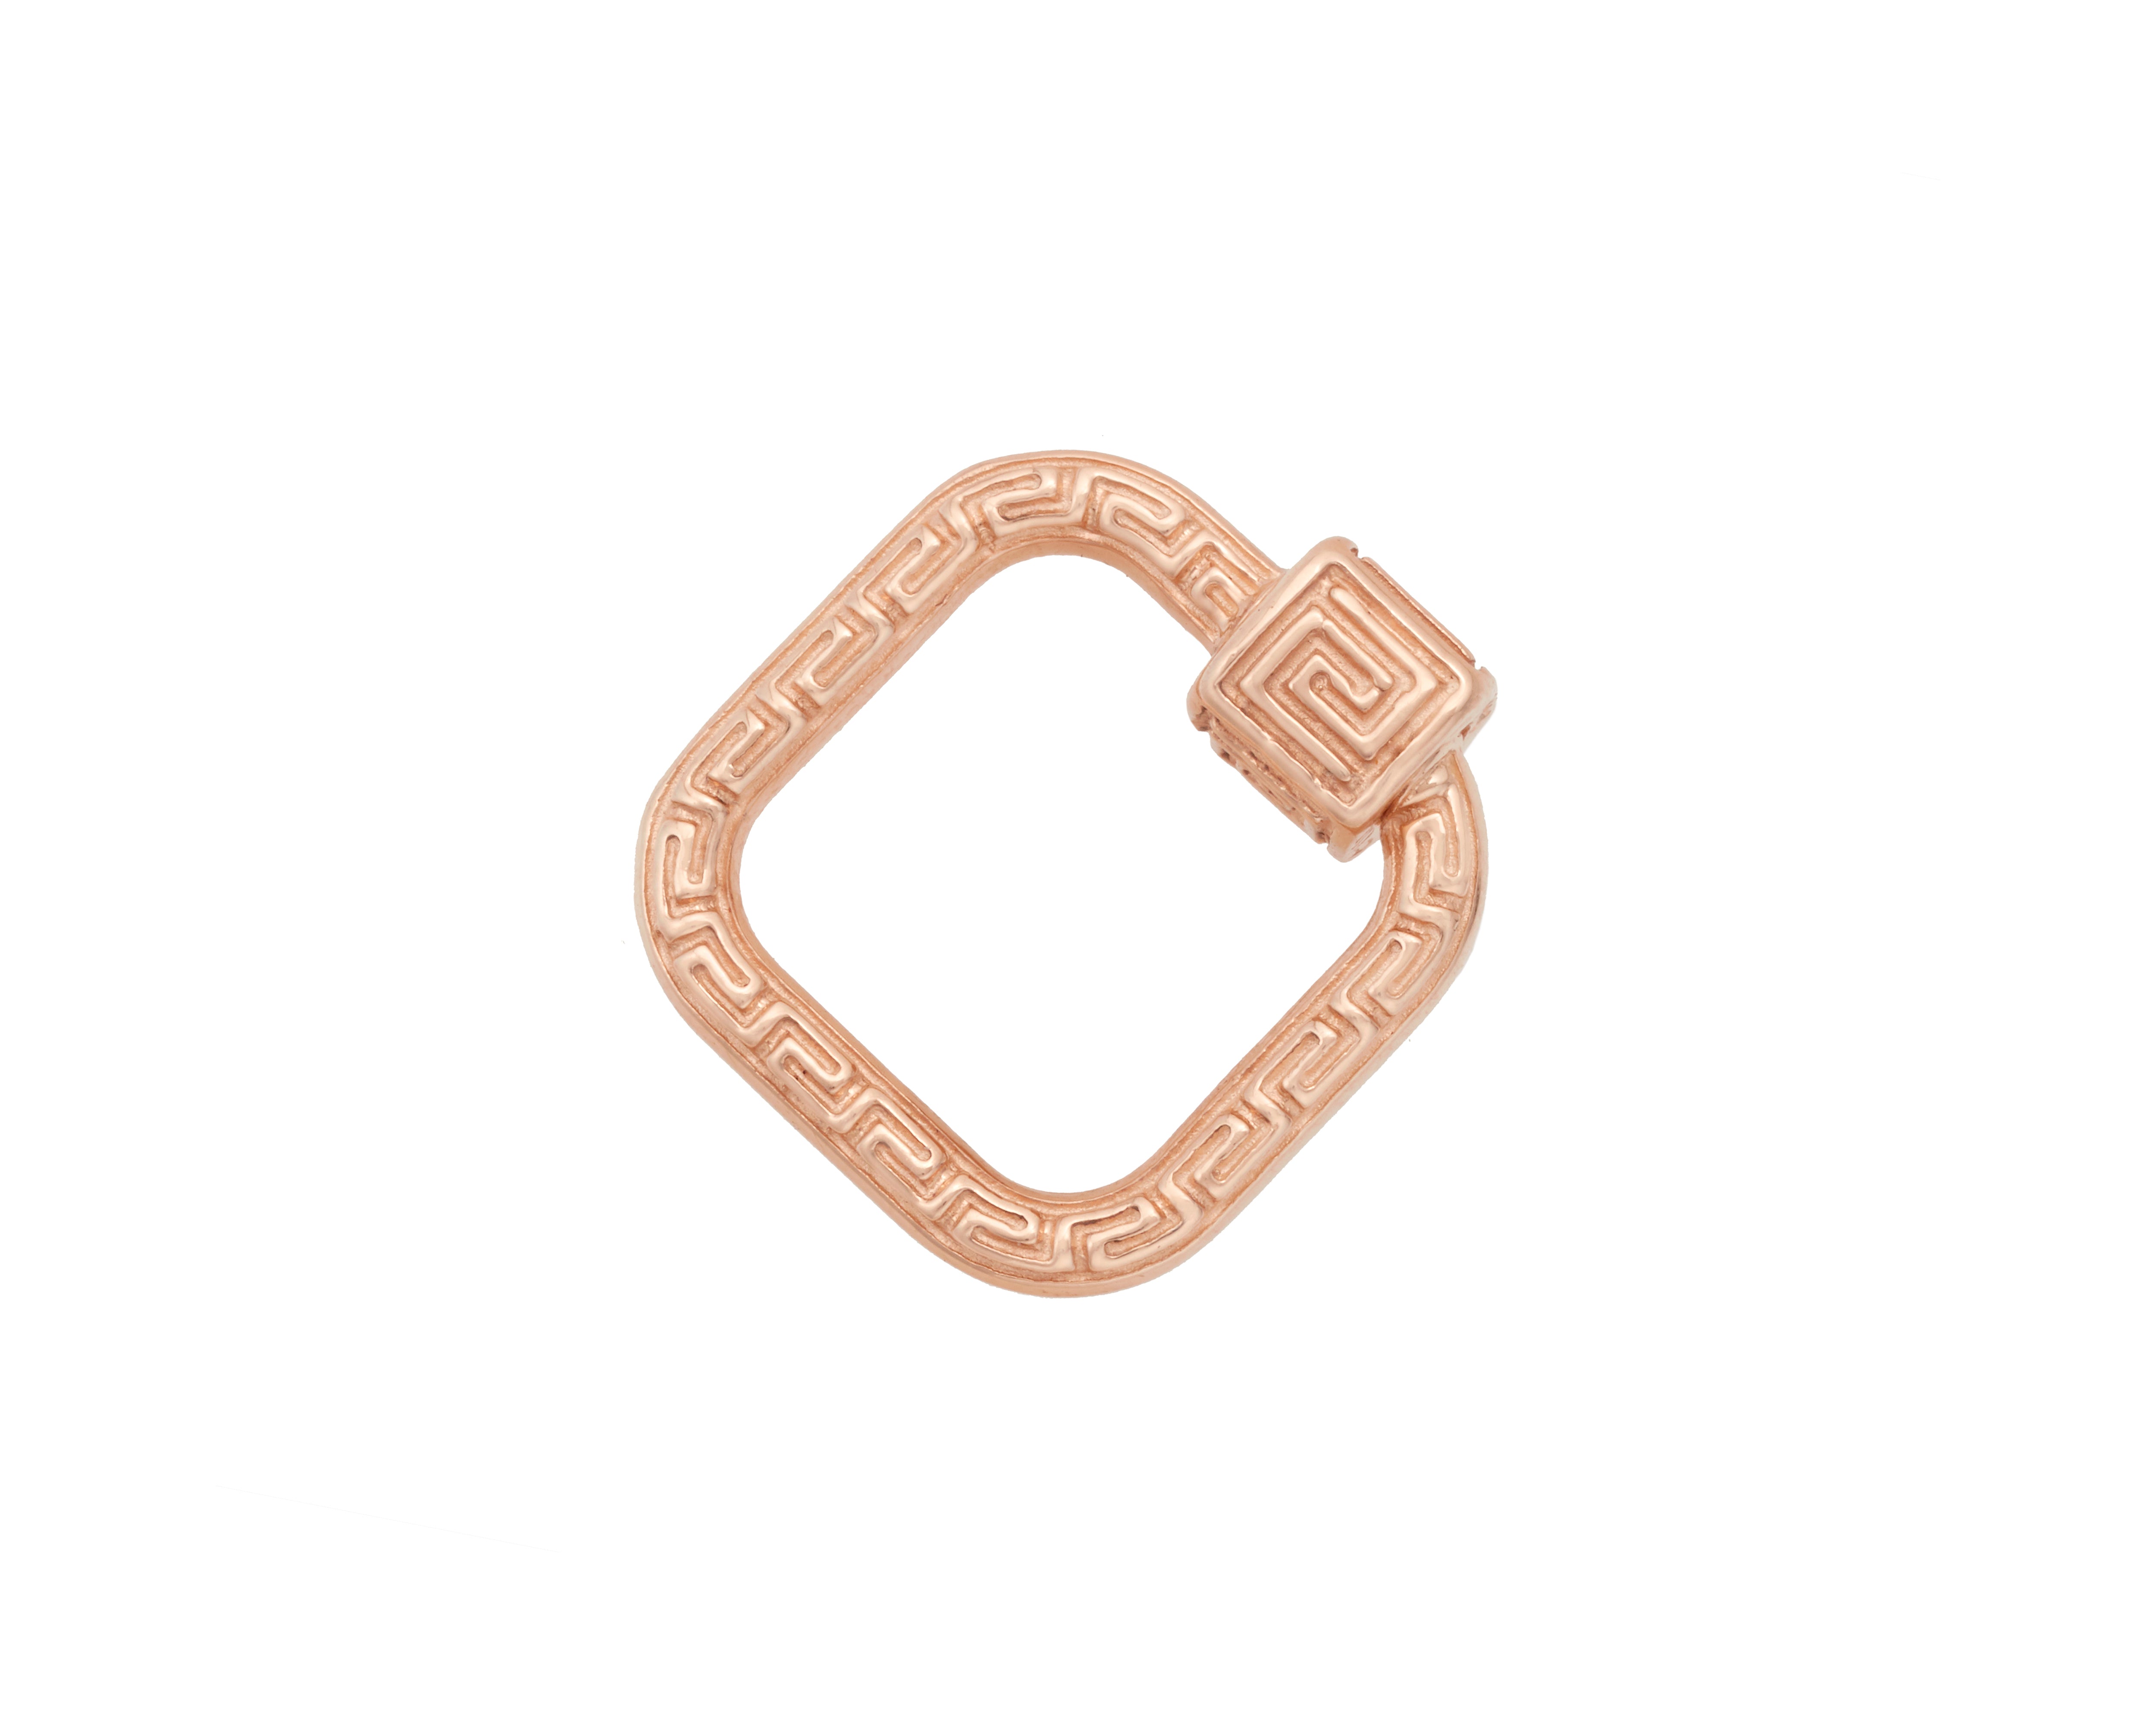 Rose gold Greek meander pendant with open clasp